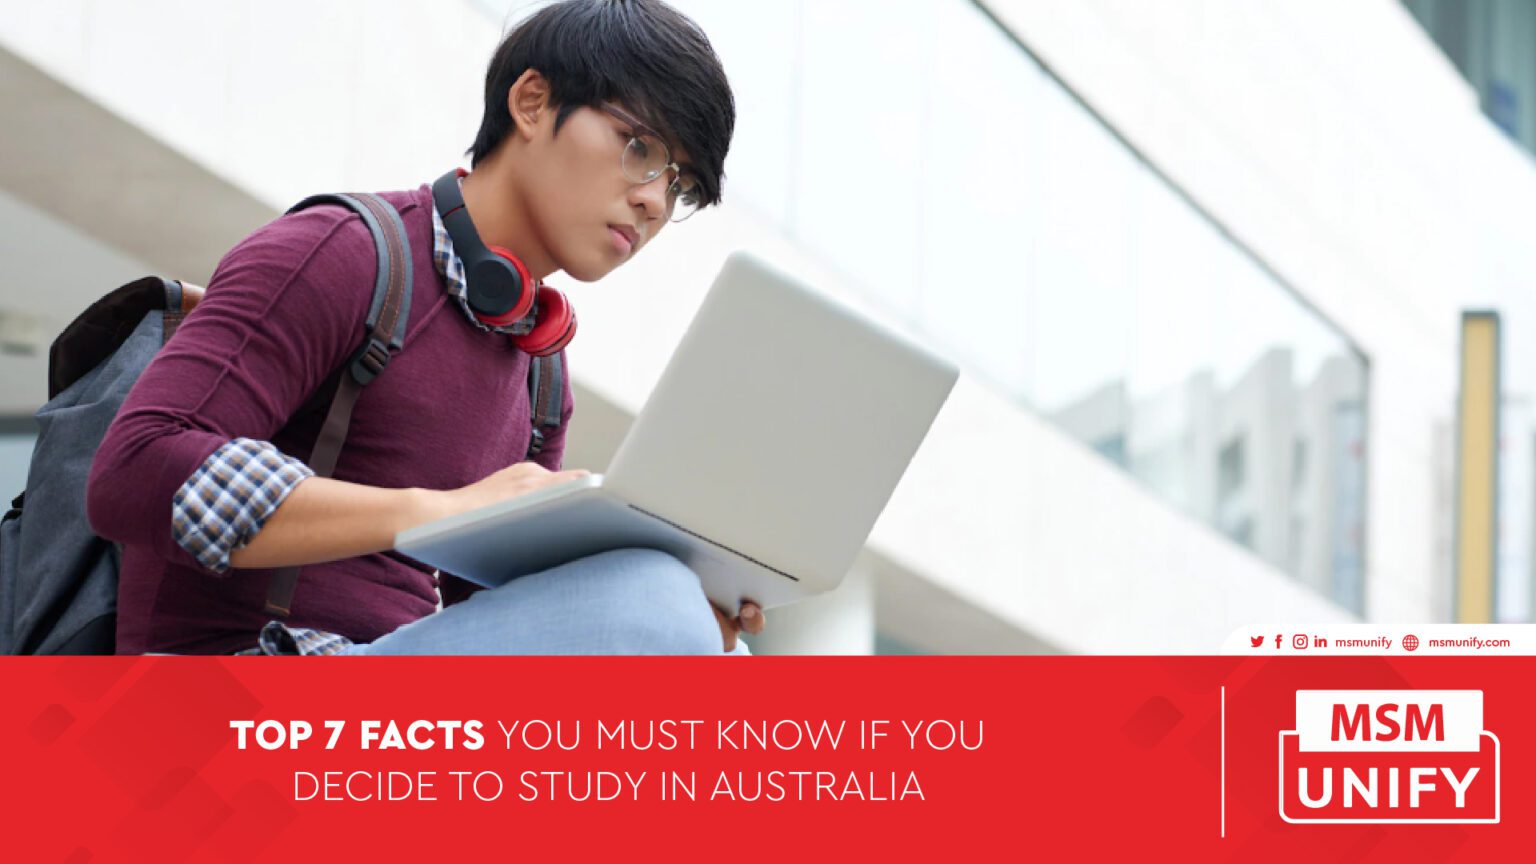 012523 MSM Unify Top 7 Facts You Must Know If You Decide To Study In Australia 01